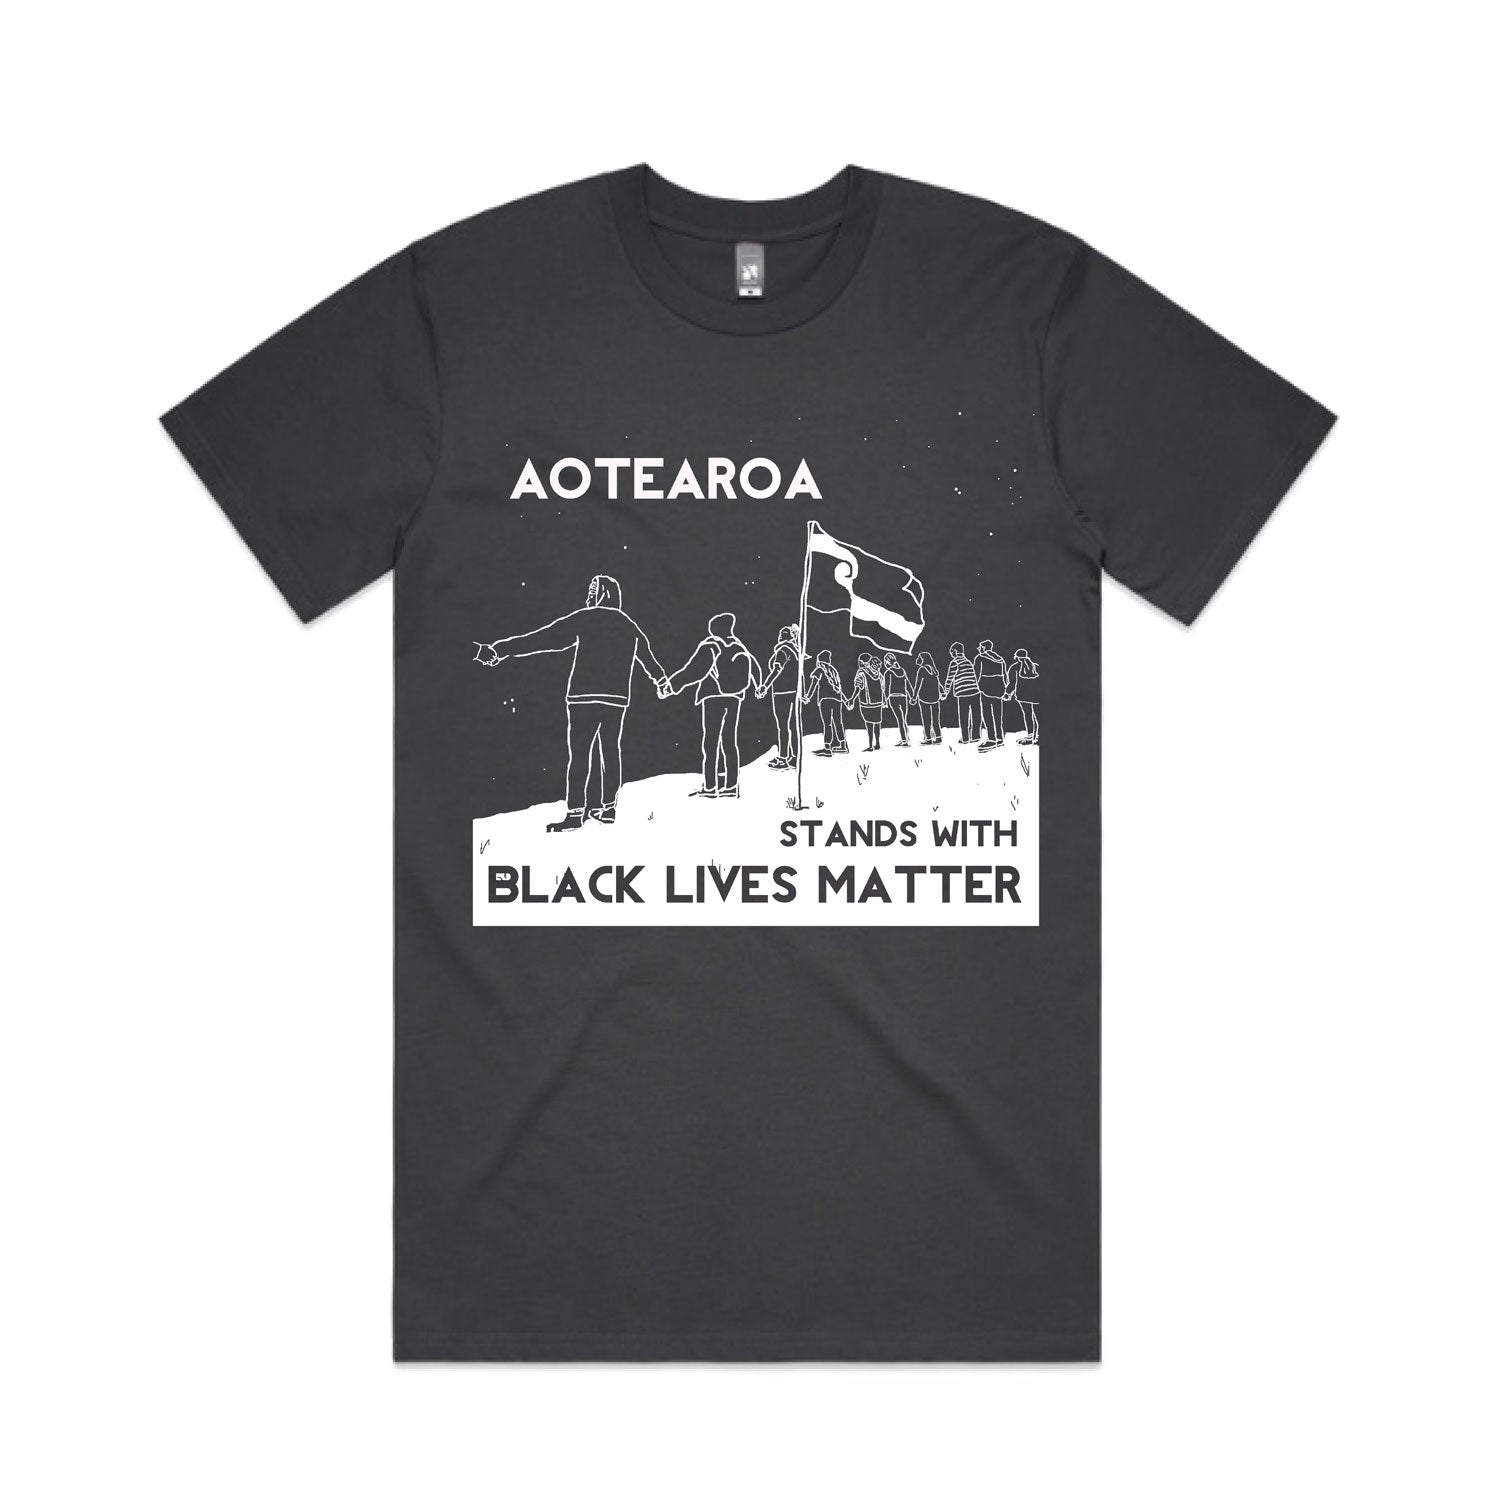 Aotearoa stands with Black Lives Matter T Shirt